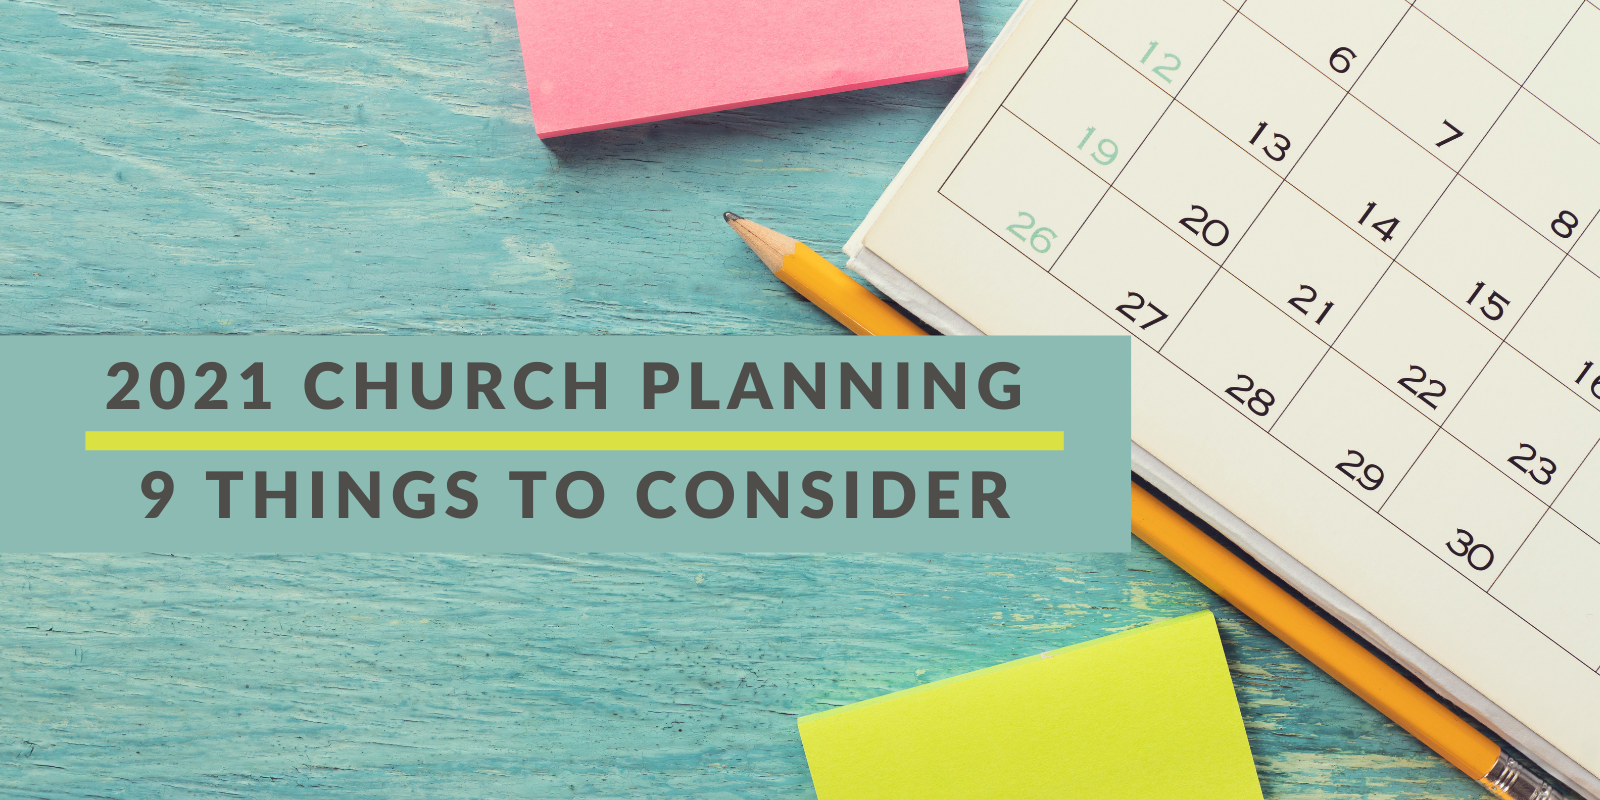 28 Church Planning - 28 Things To Consider - Smart Church Management